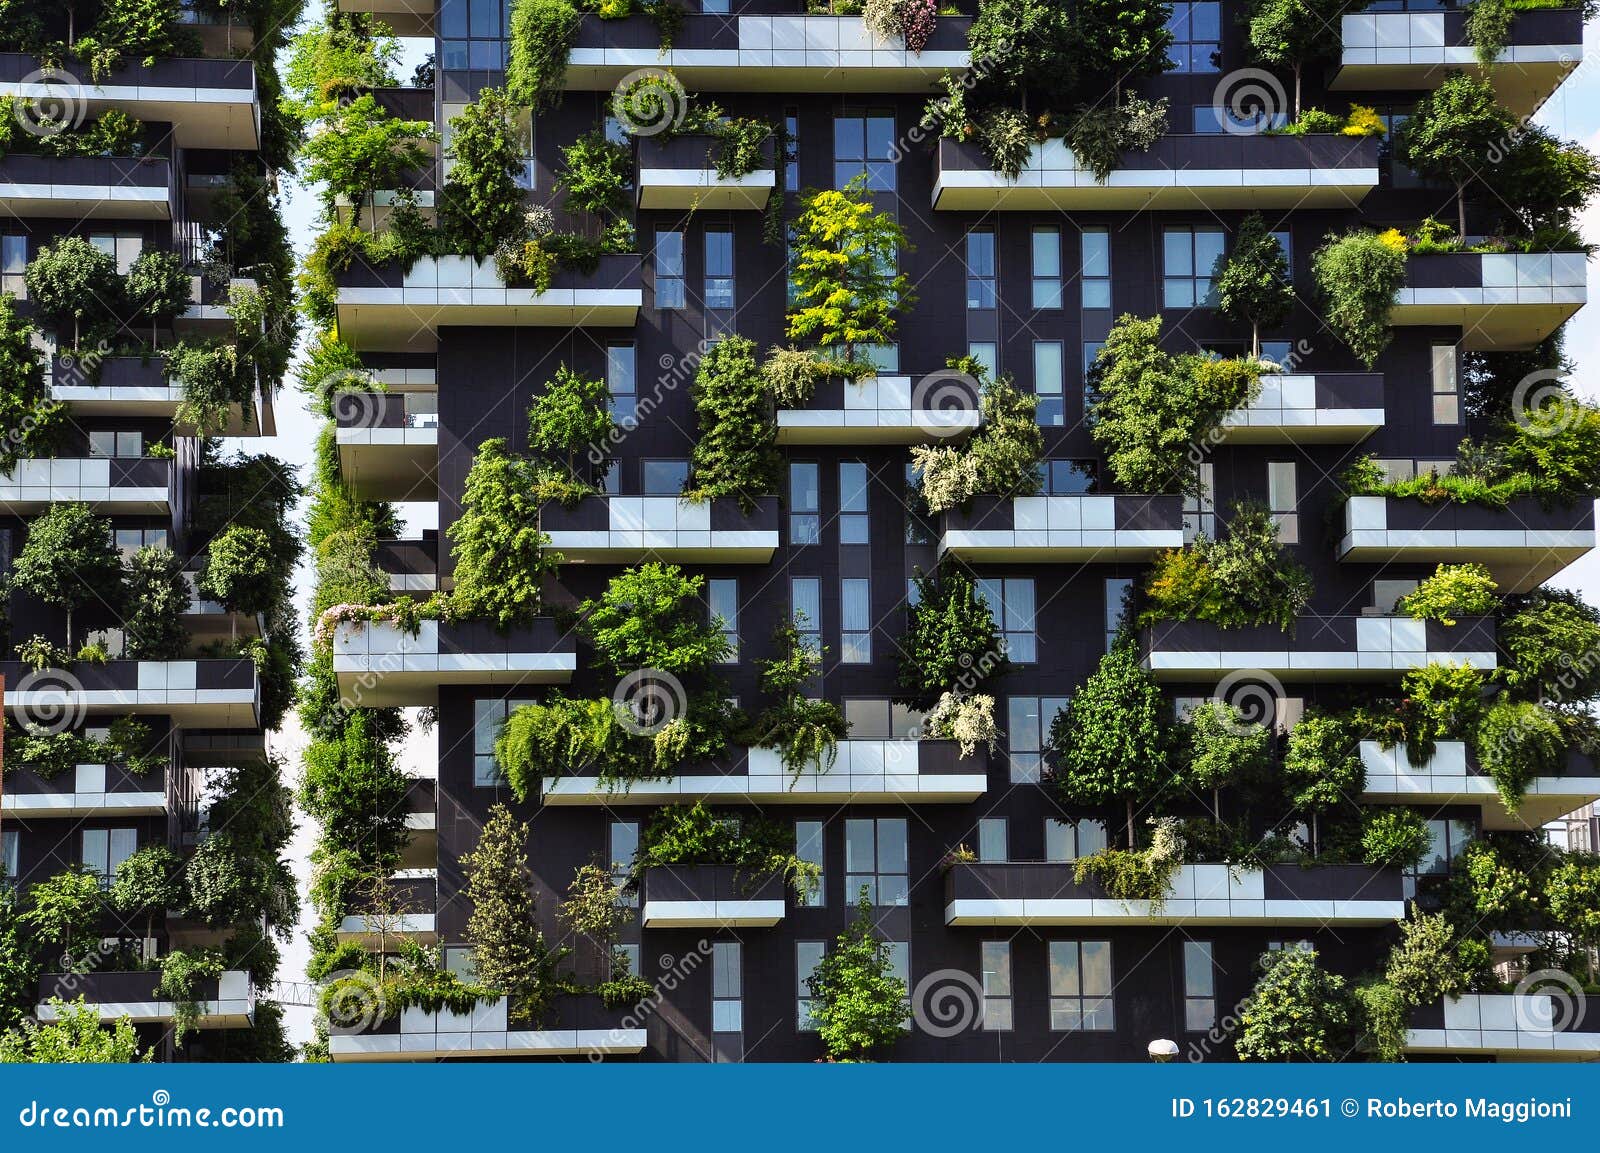 vertical forest. bosco verticale contemporary architecture in milan, italy